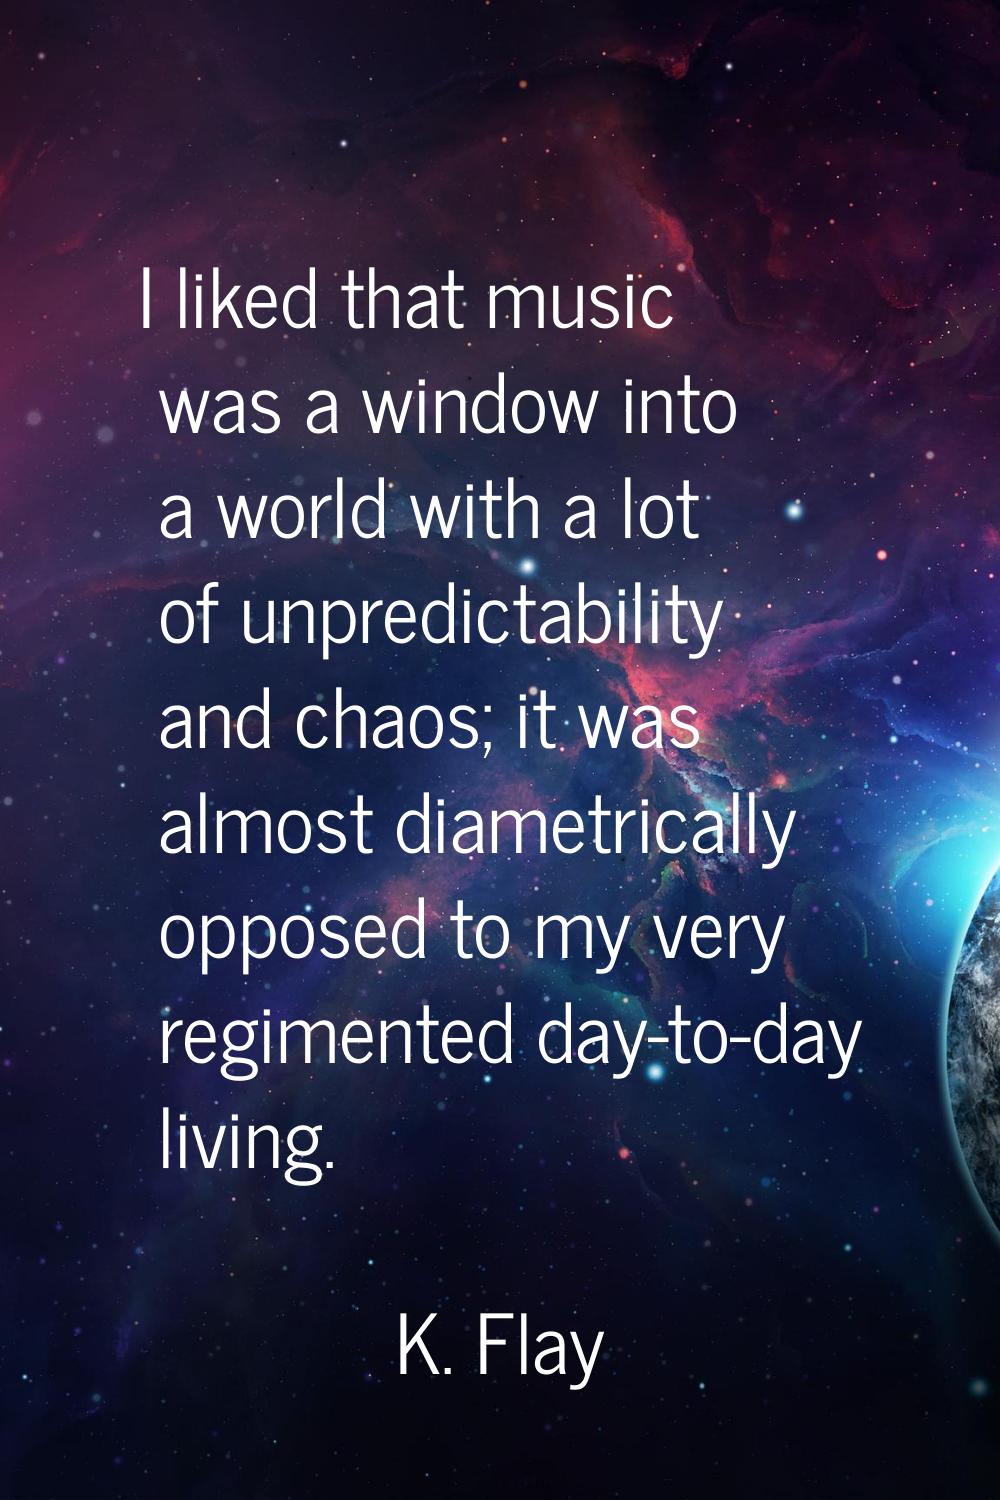 I liked that music was a window into a world with a lot of unpredictability and chaos; it was almos